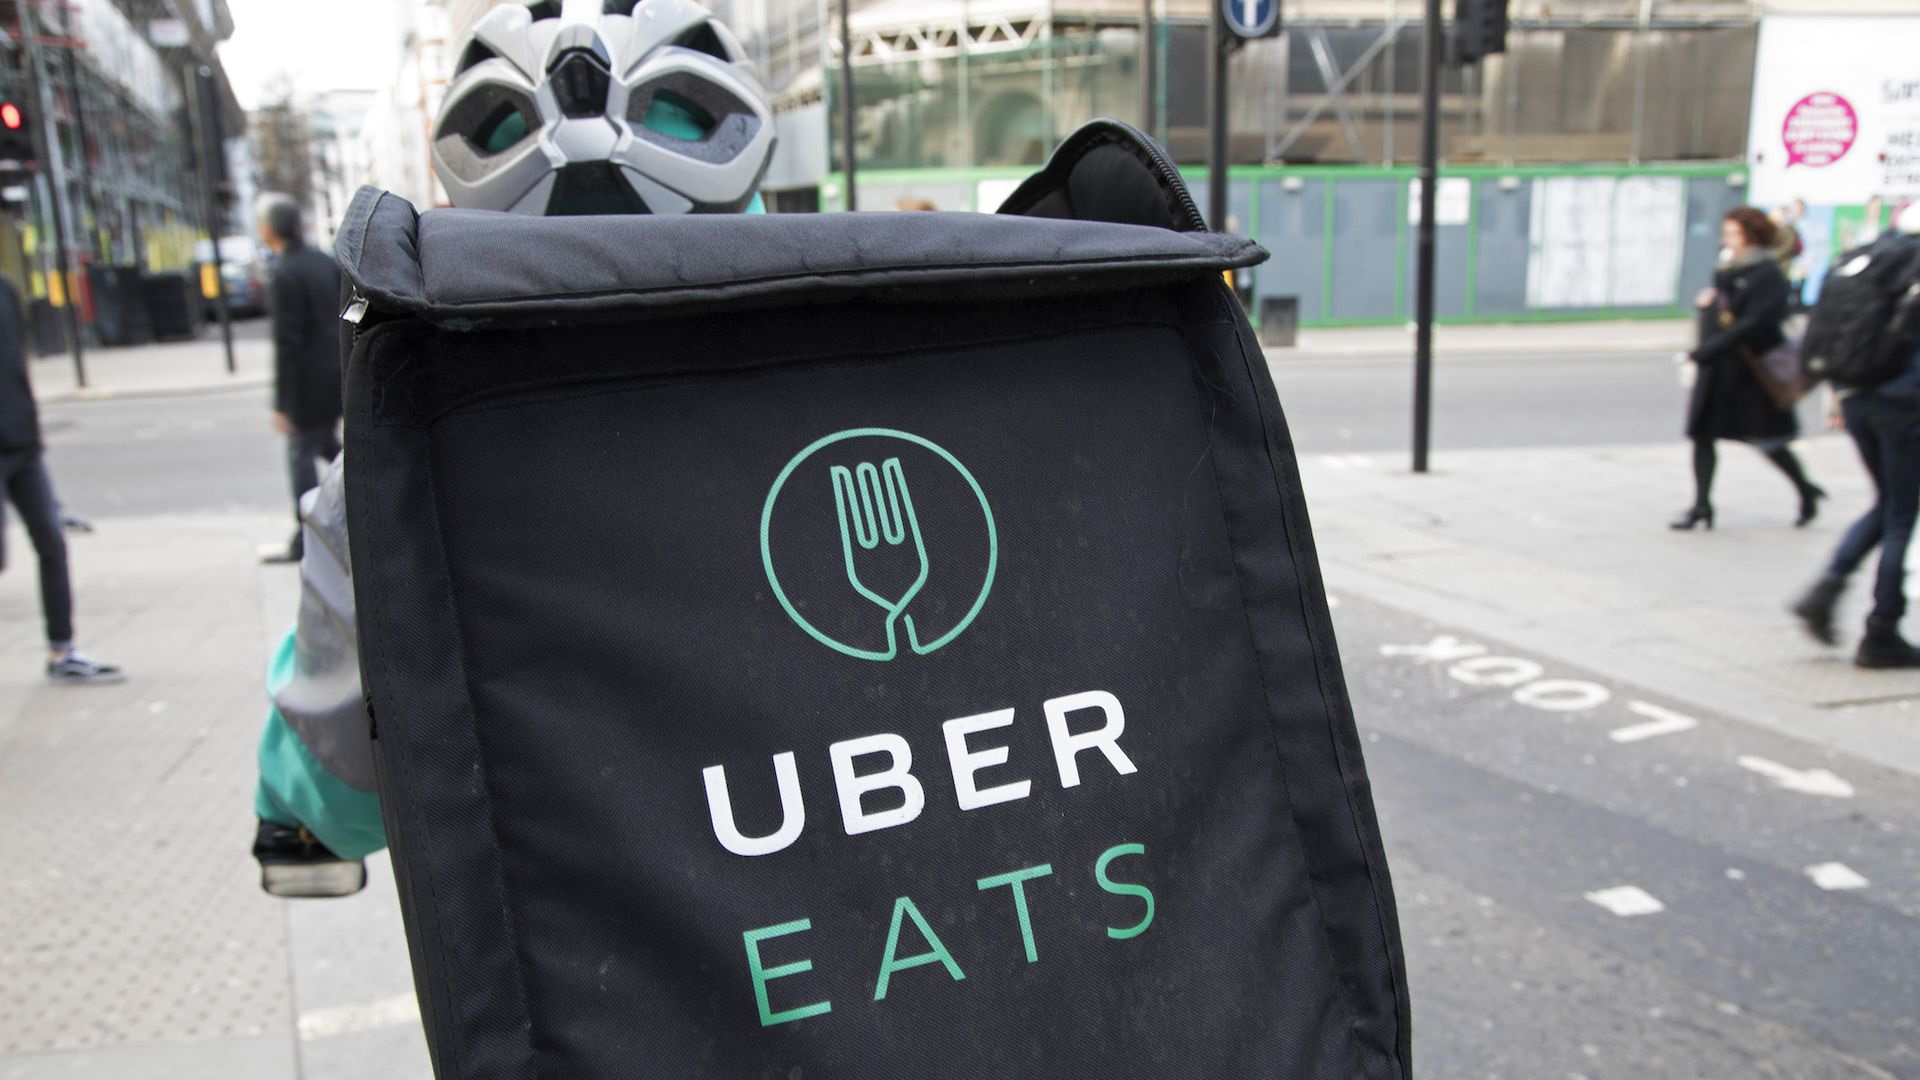 Ubereats food delivery service